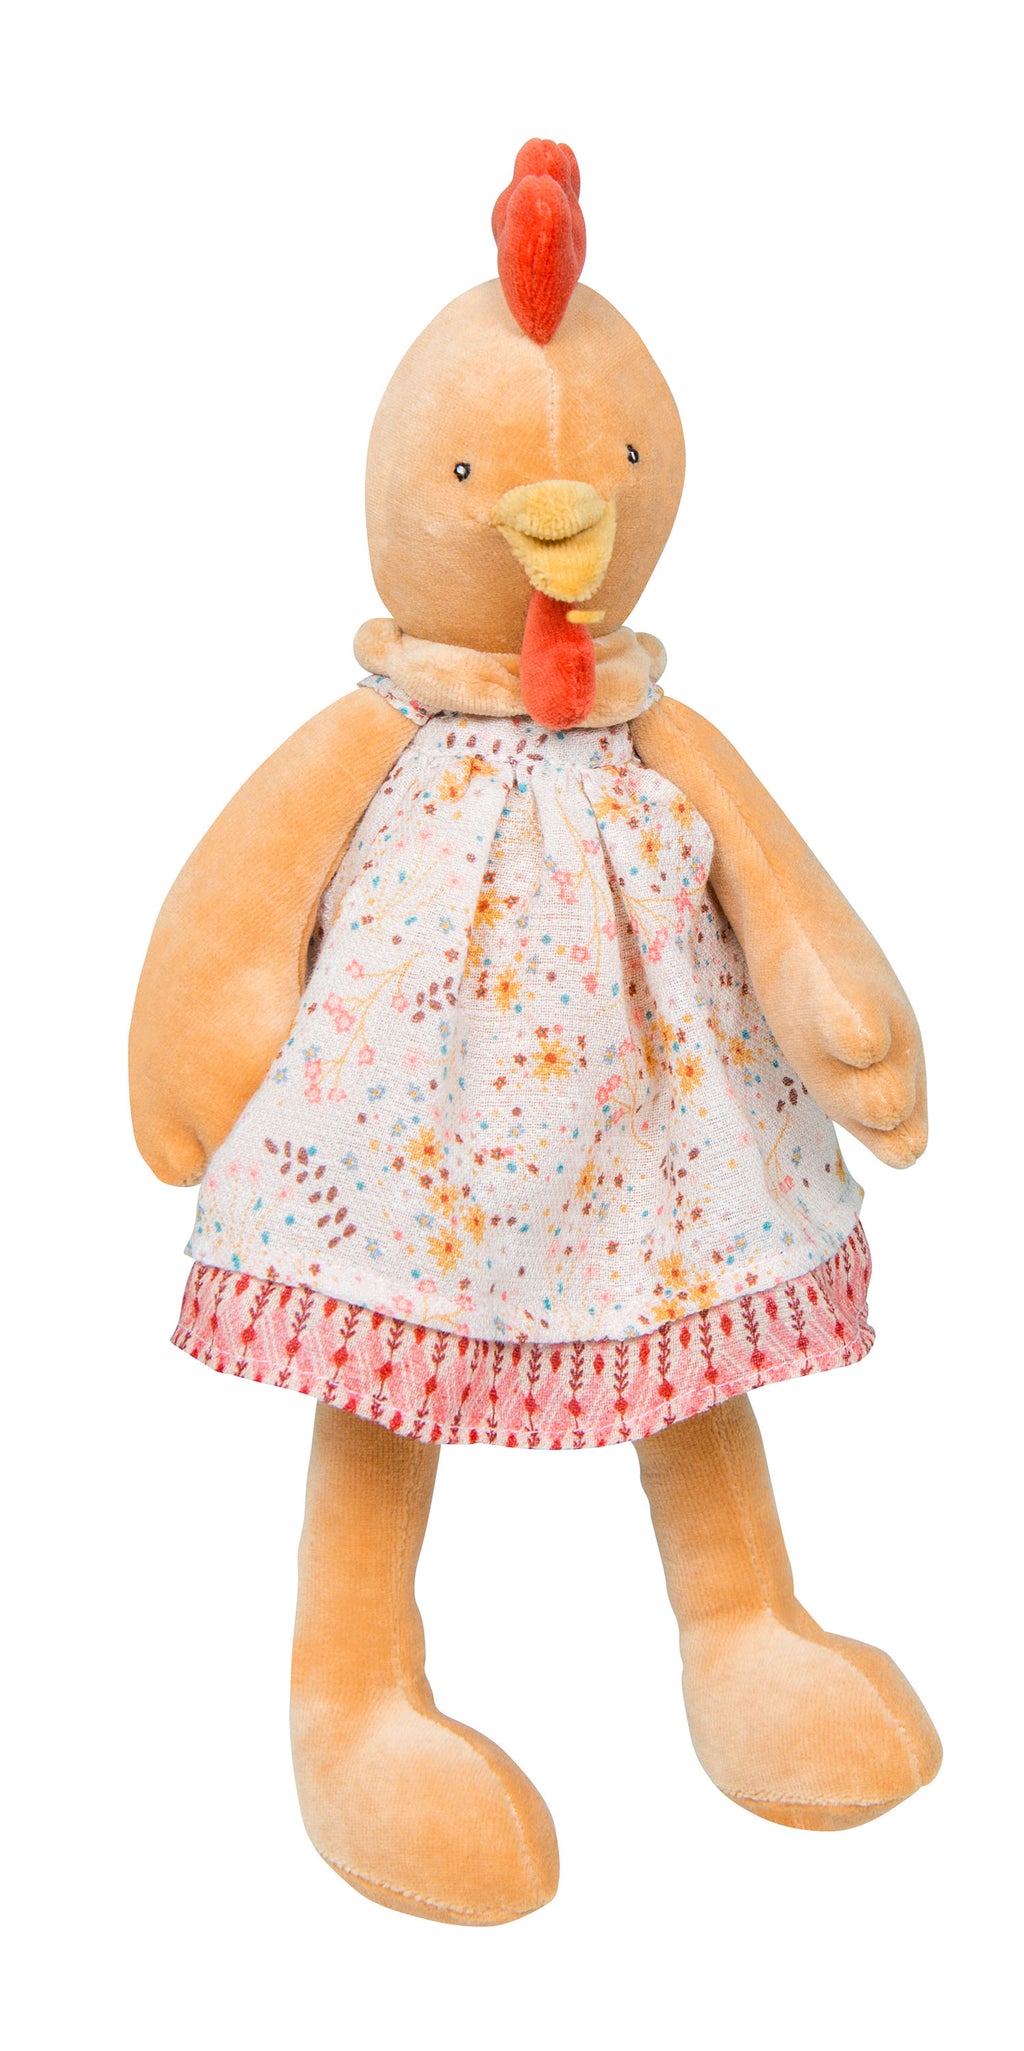 Soft and gentle in her pretty floral dress and delicate shades of orange, Félicie the hen is the perfect plush animal for cuddling baby in her cosy nest!  Suitable from new born and many years later.   